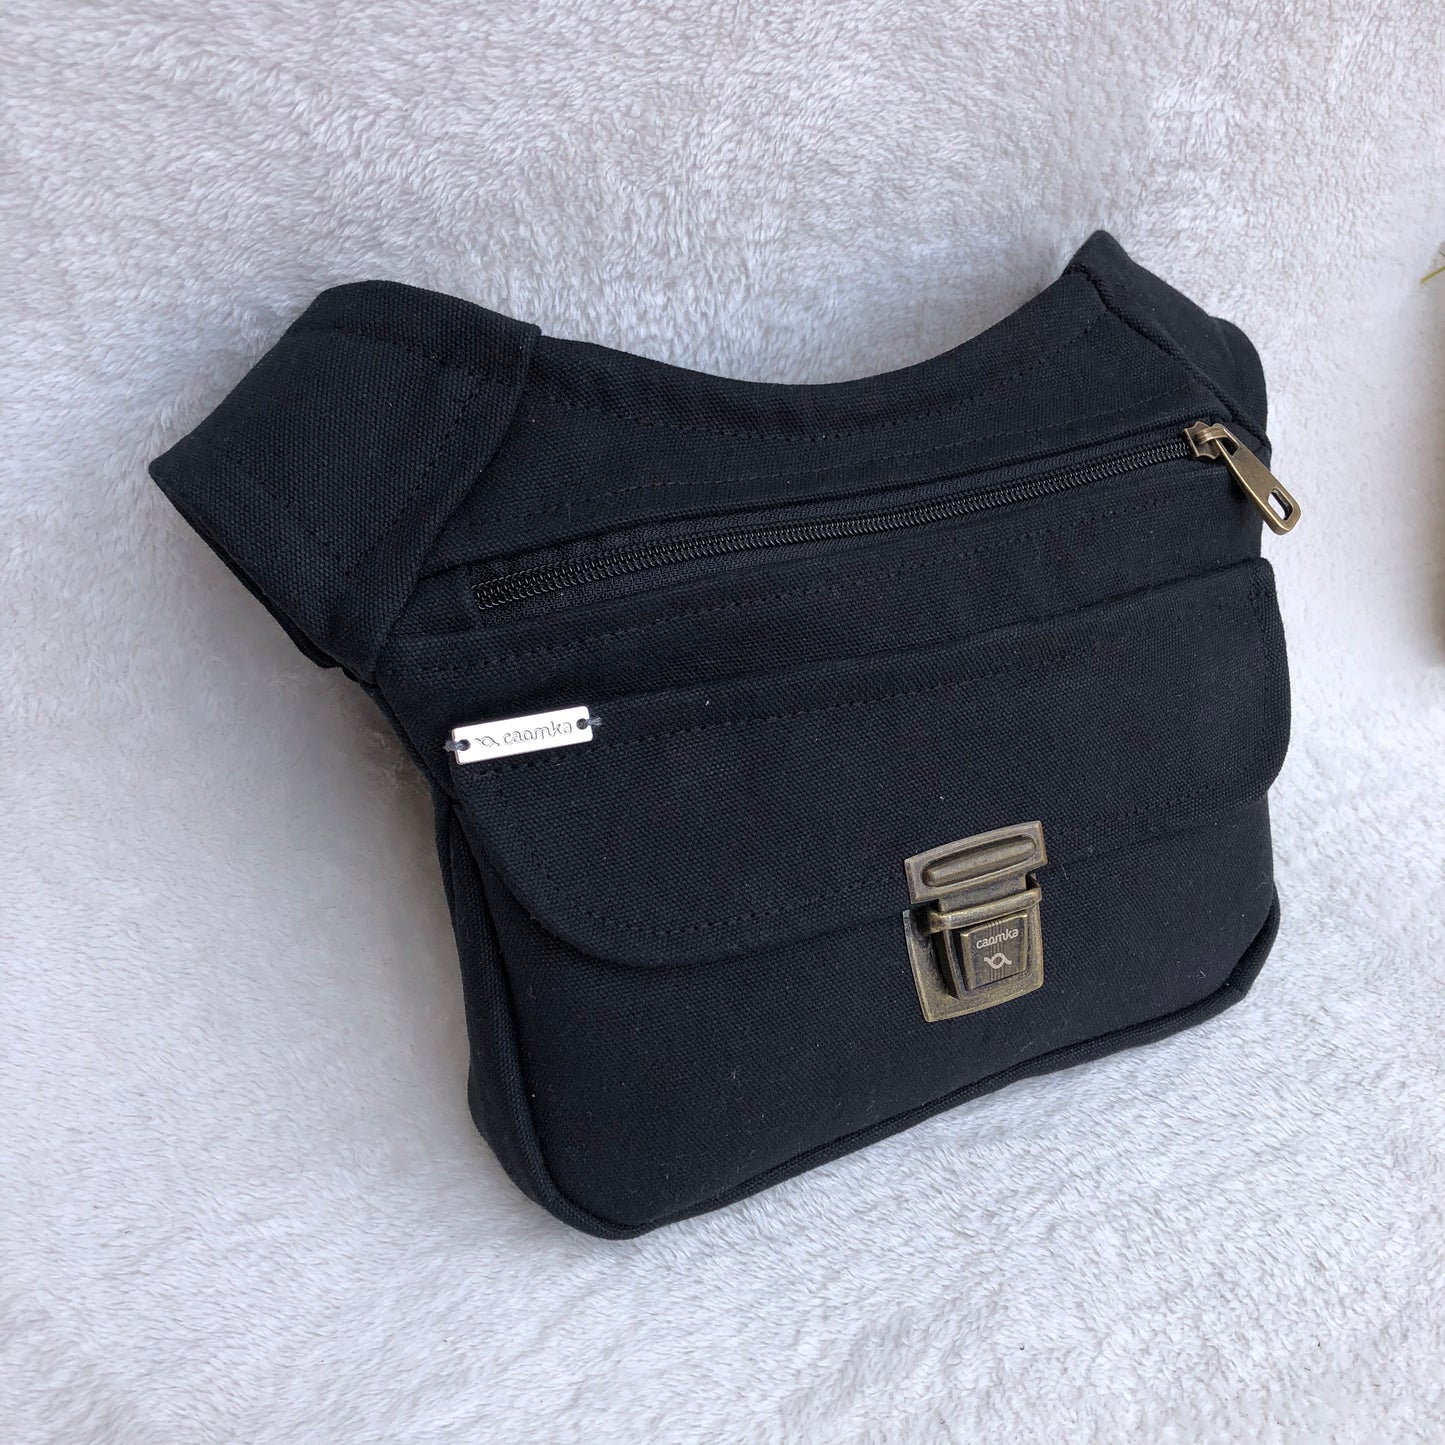 Special Classic Black &amp; Old Gold + Extra Gesäßtasche, exklusives Teil Nr. 9284